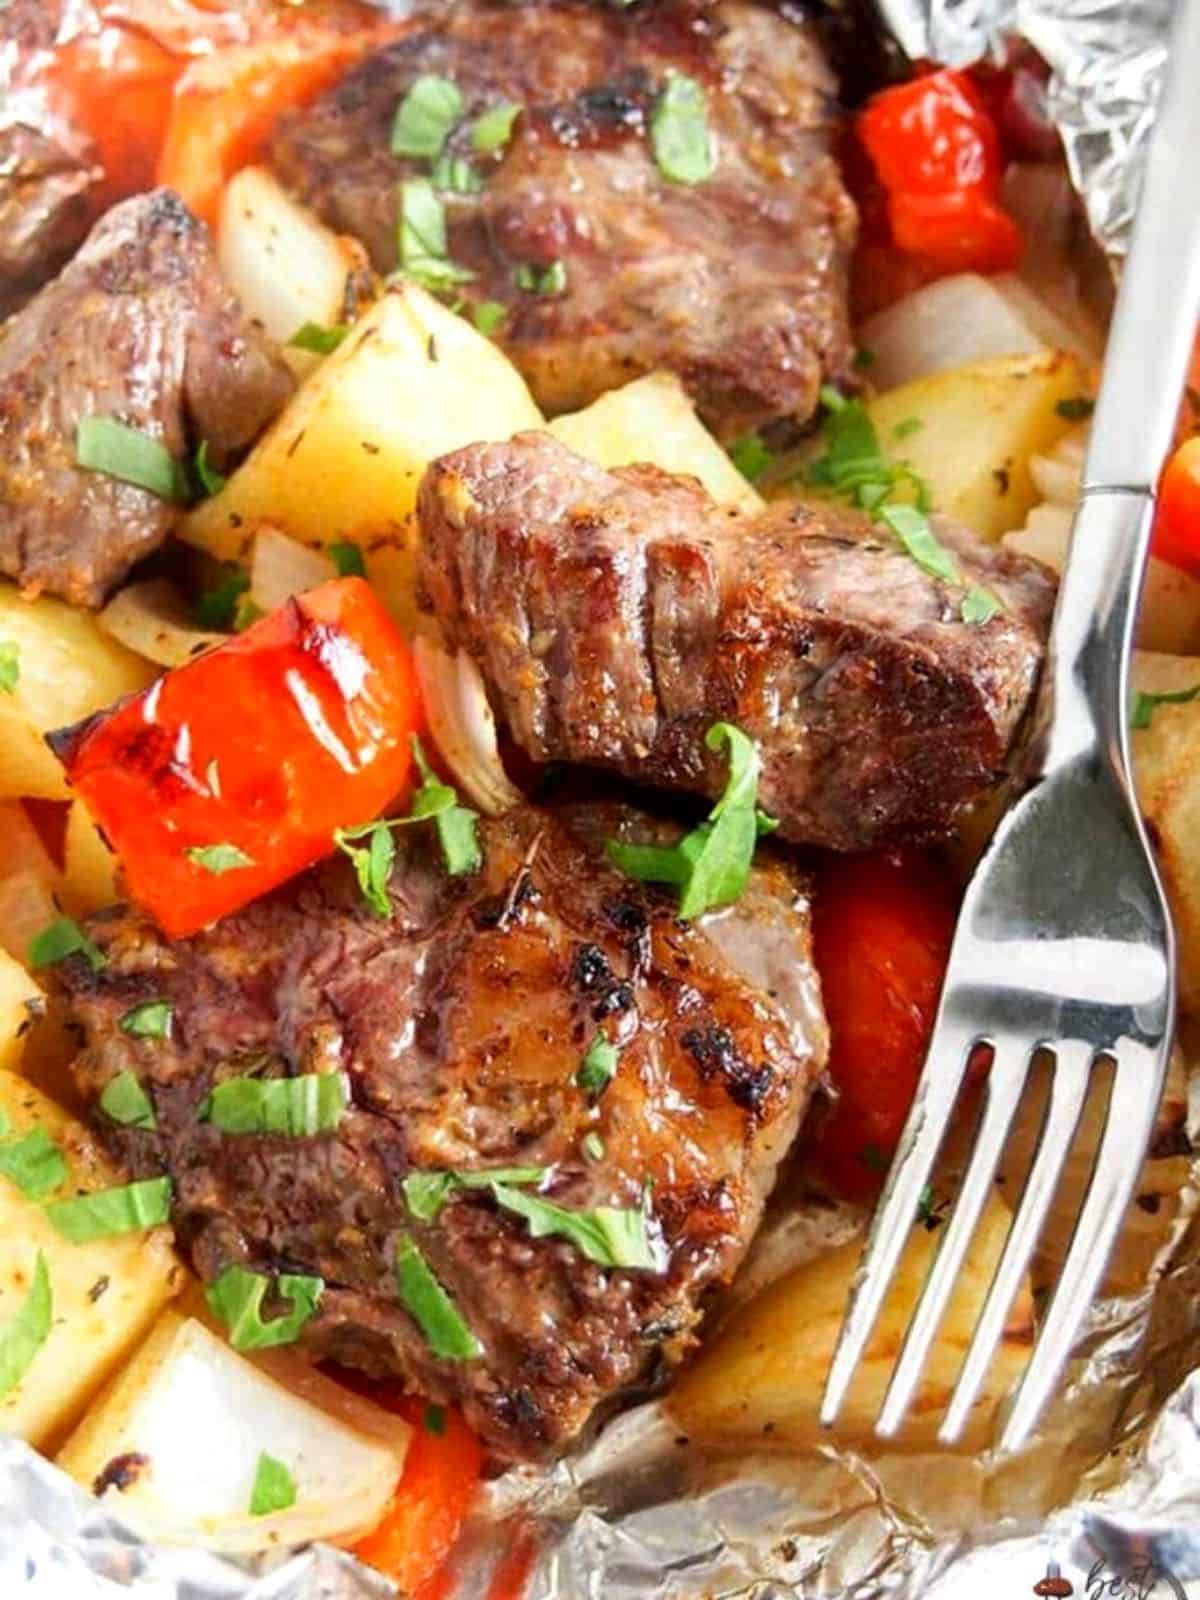 Steak in foil with peppers and potatoes.